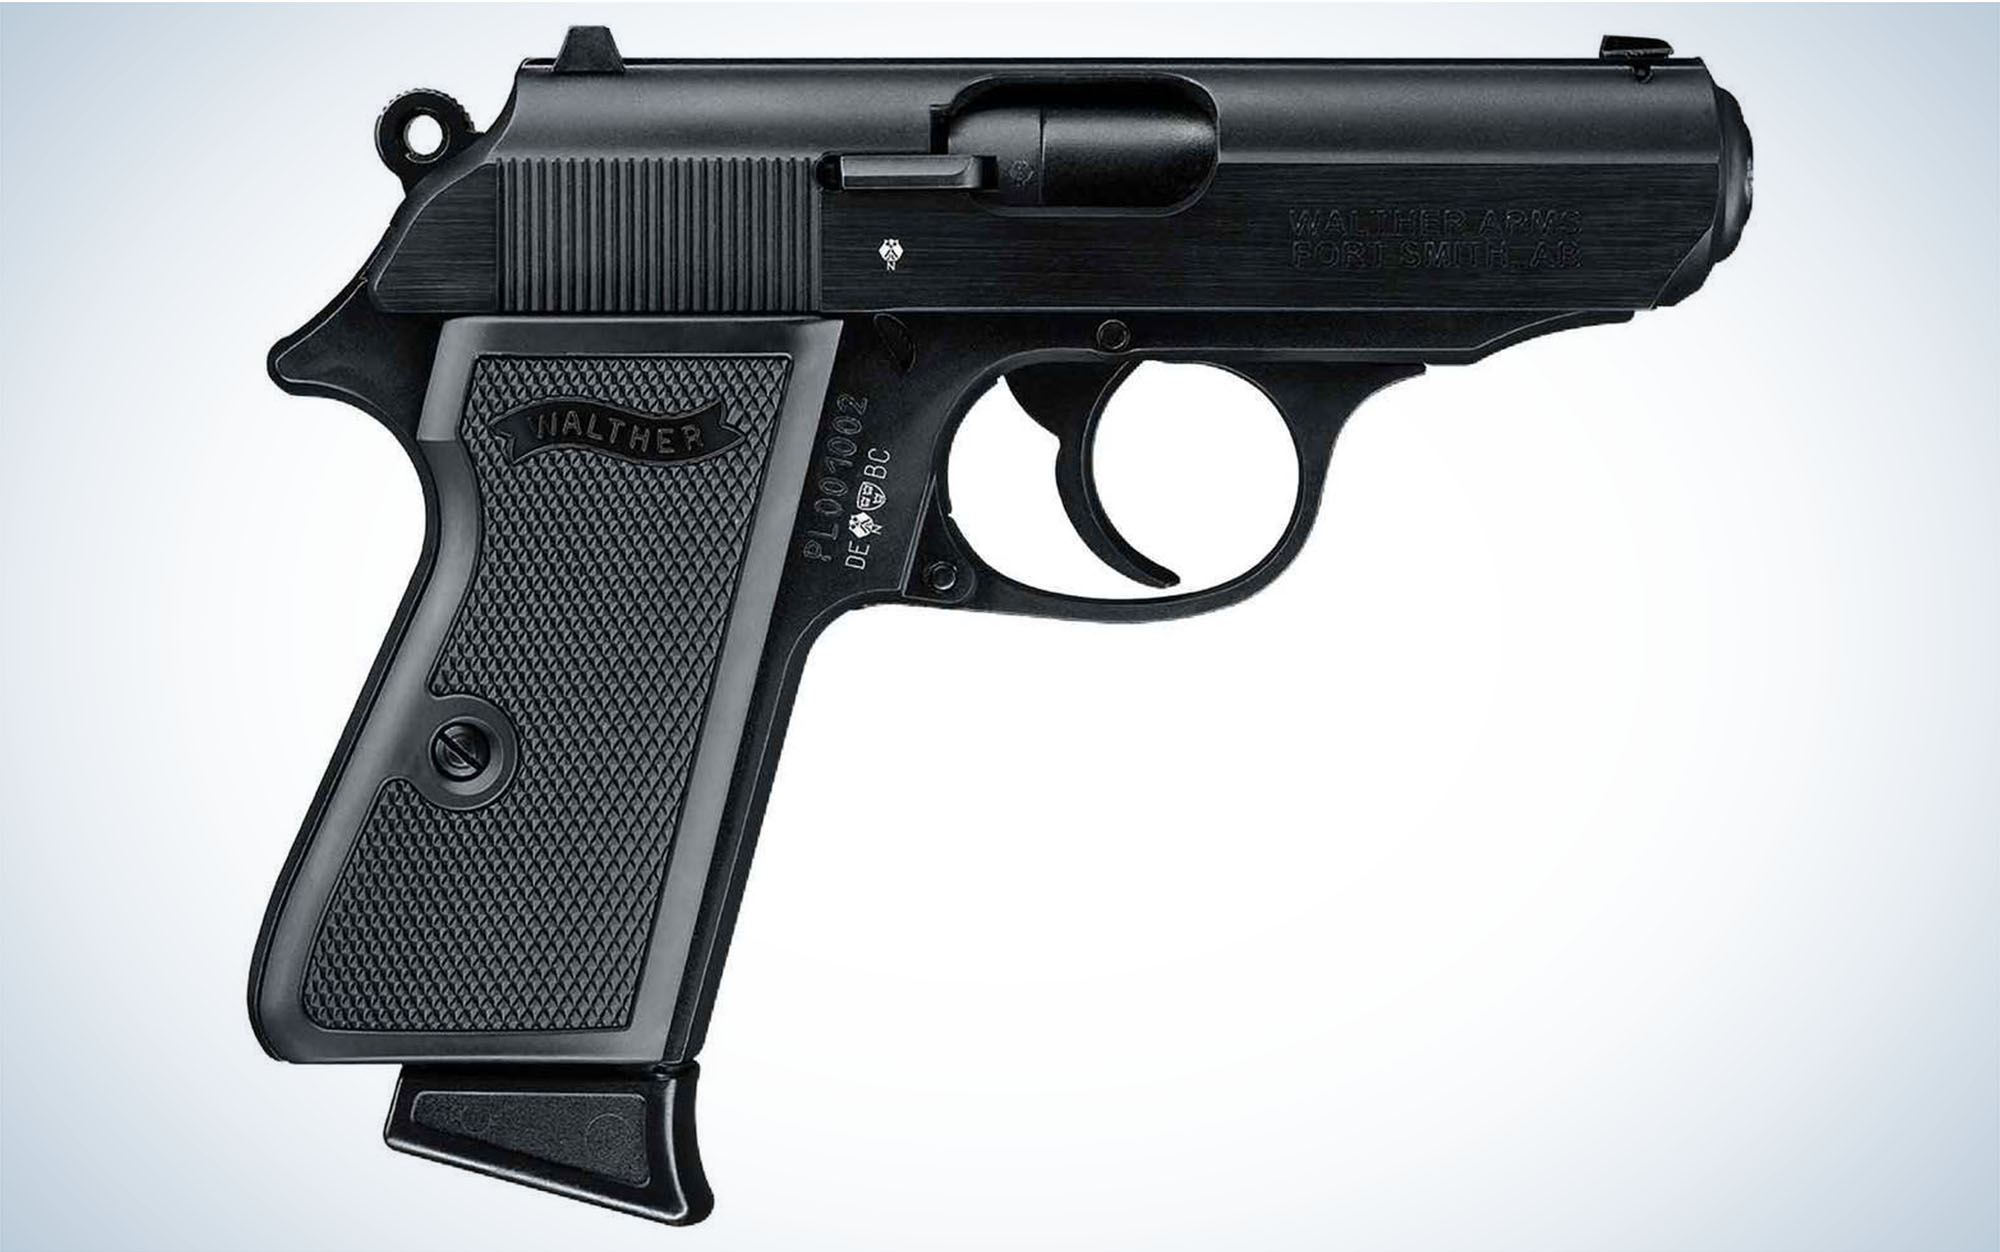 The Walther PPK/s 22 Black is one of the best .22 pistols.